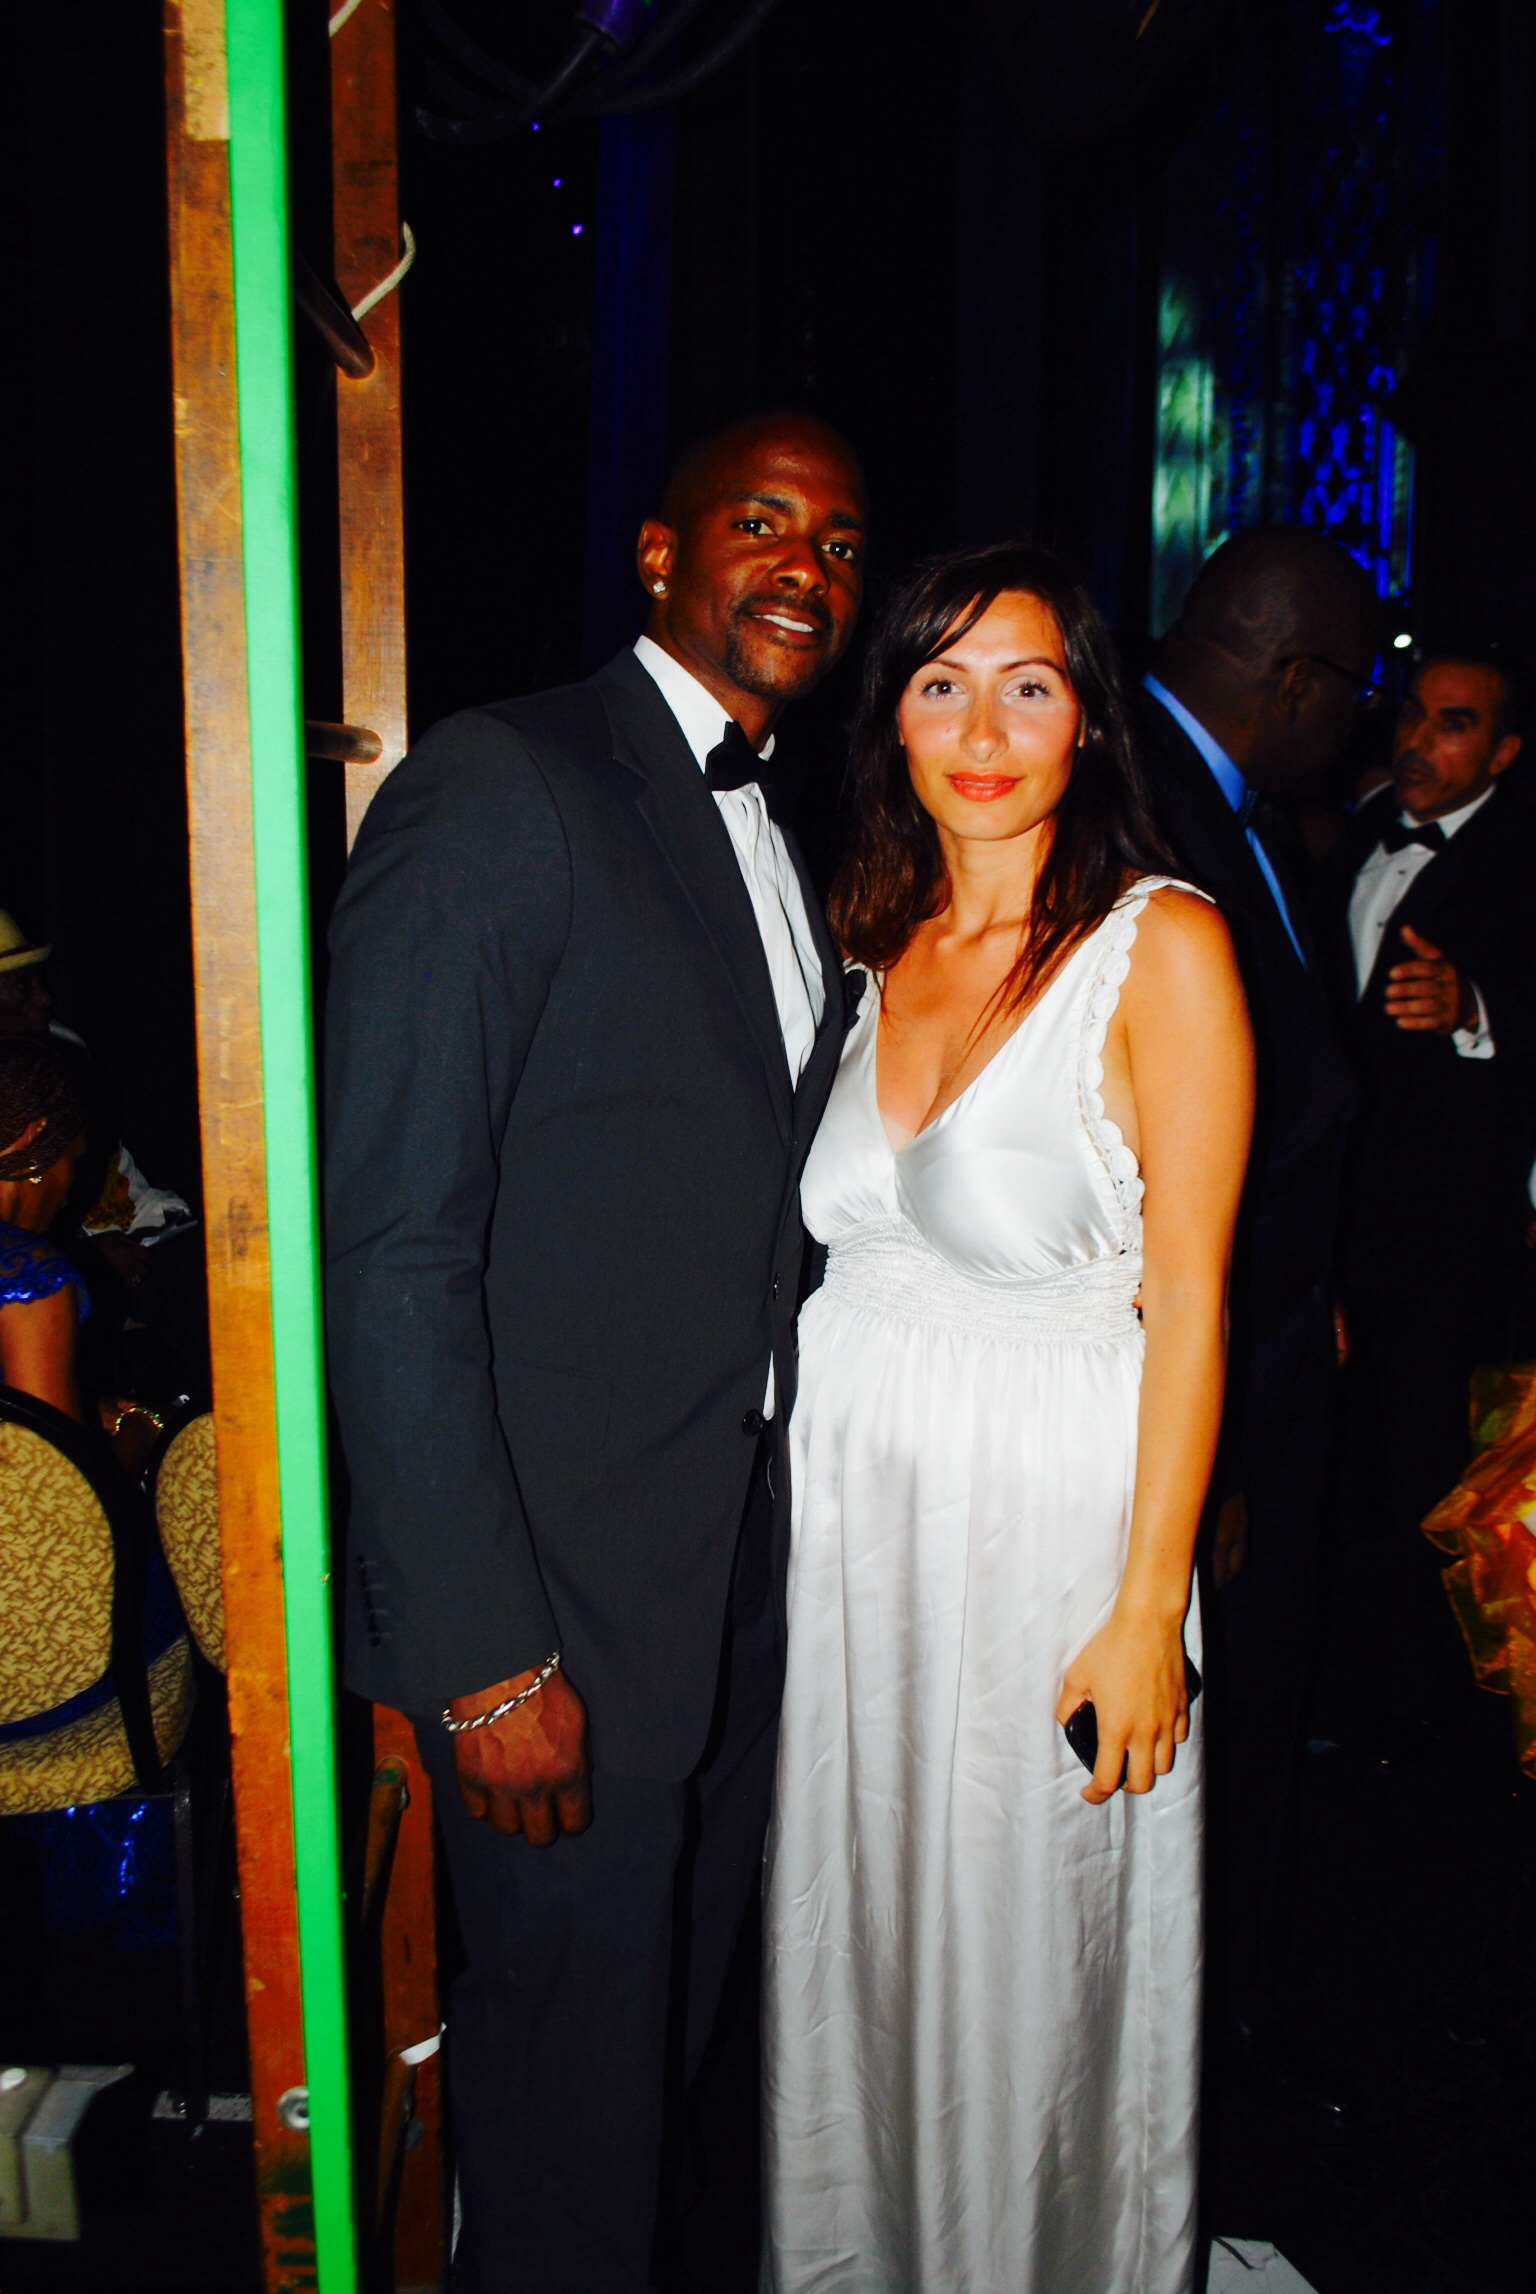 With Keith Robinson of Dream Girls in L.A 2014 at the NAFCA awards.